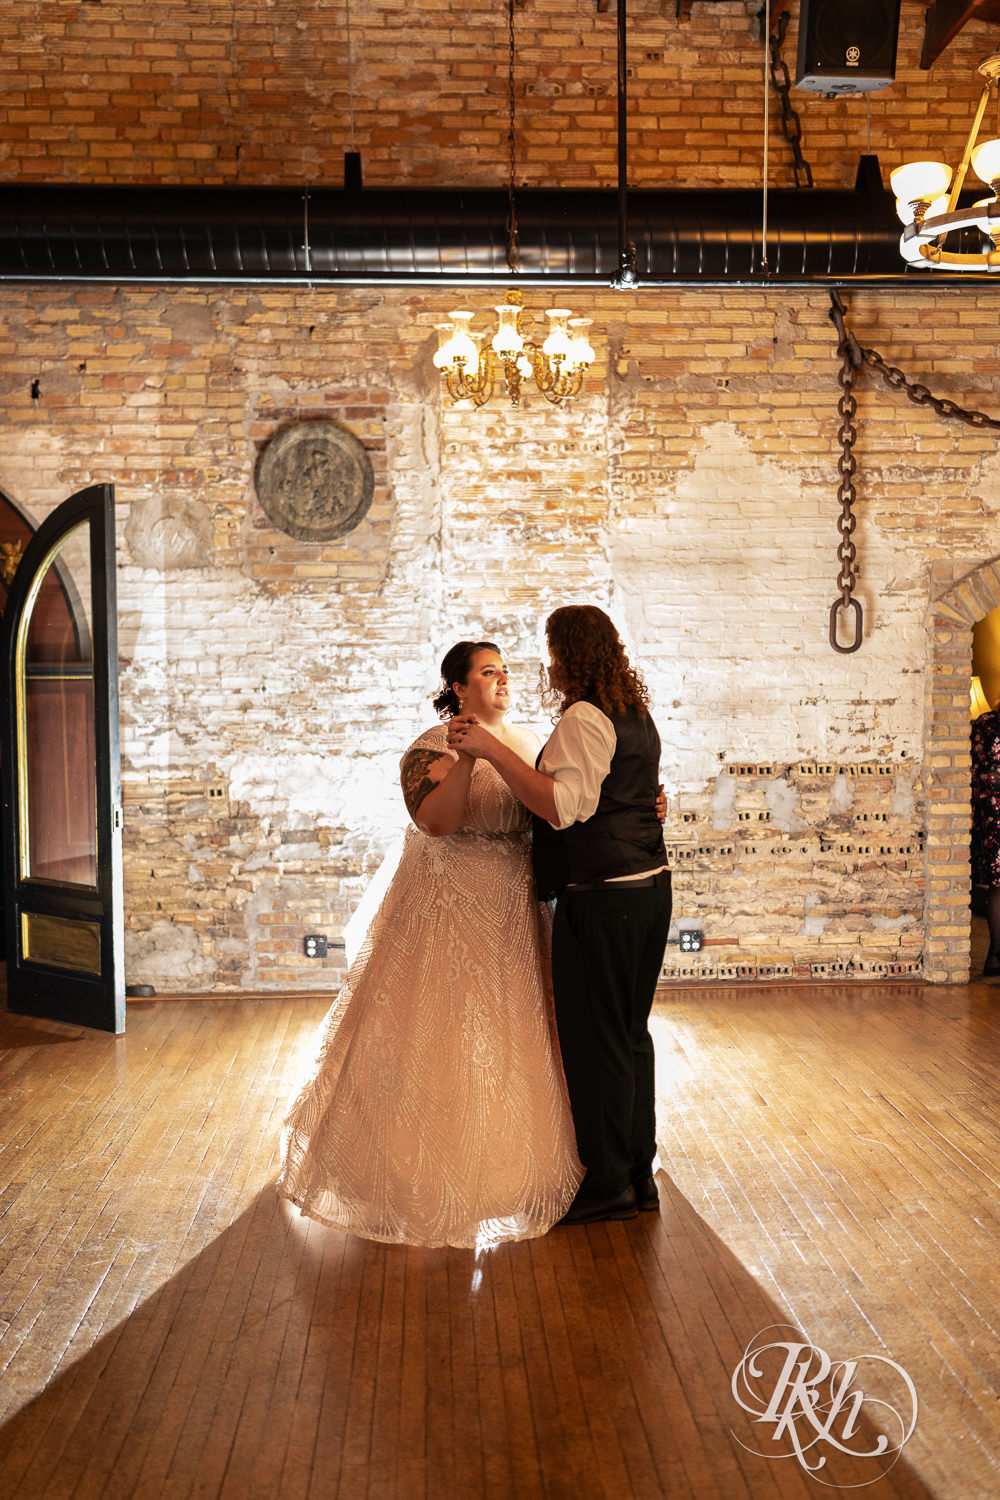 Bride and groom share first dance at wedding reception at Kellerman's Event Center in White Bear Lake, Minnesota.